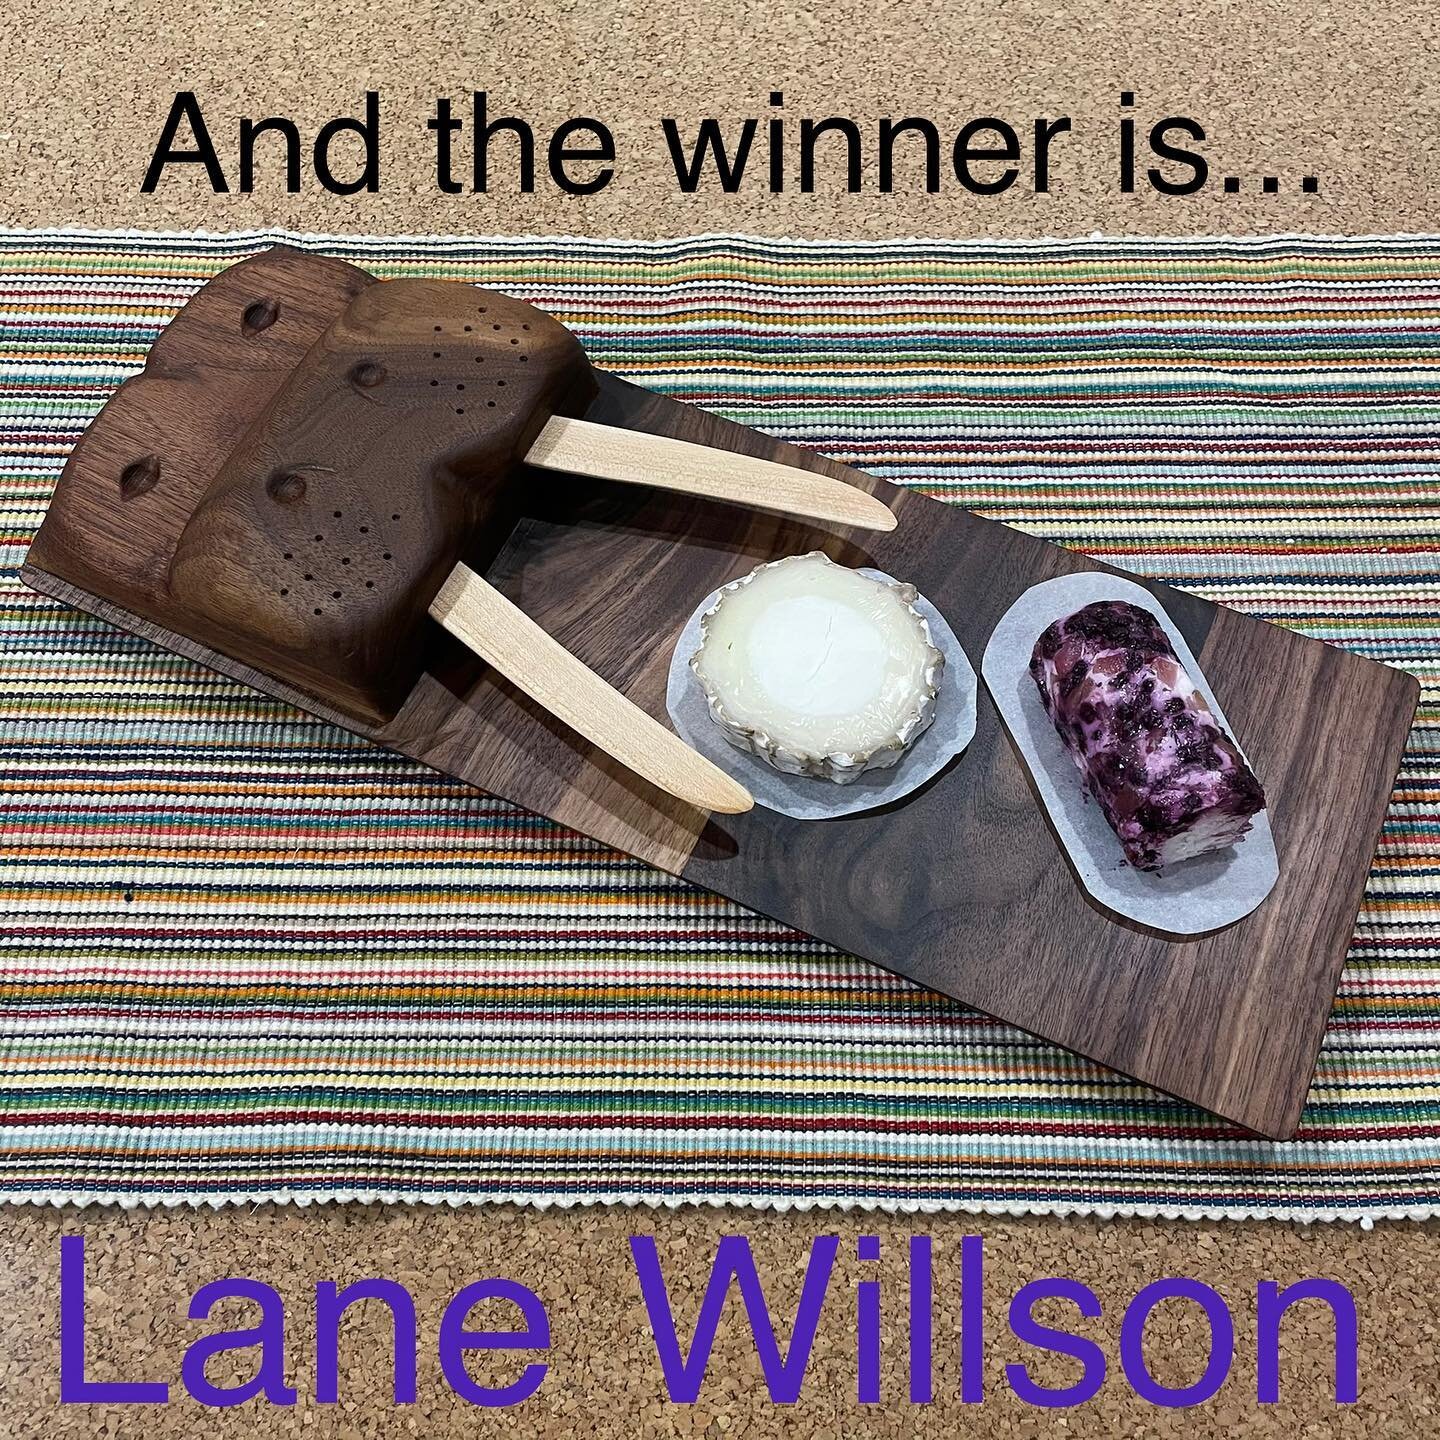 AND THE WINNER IS... Lane Willson!

Thank you so much to everyone that donated, shared, liked, and commented. We raised 451 smackaroos for @mitzvahcircle. 

I am humbled by the response to this raffle.  Let me know in the comments if you would like m